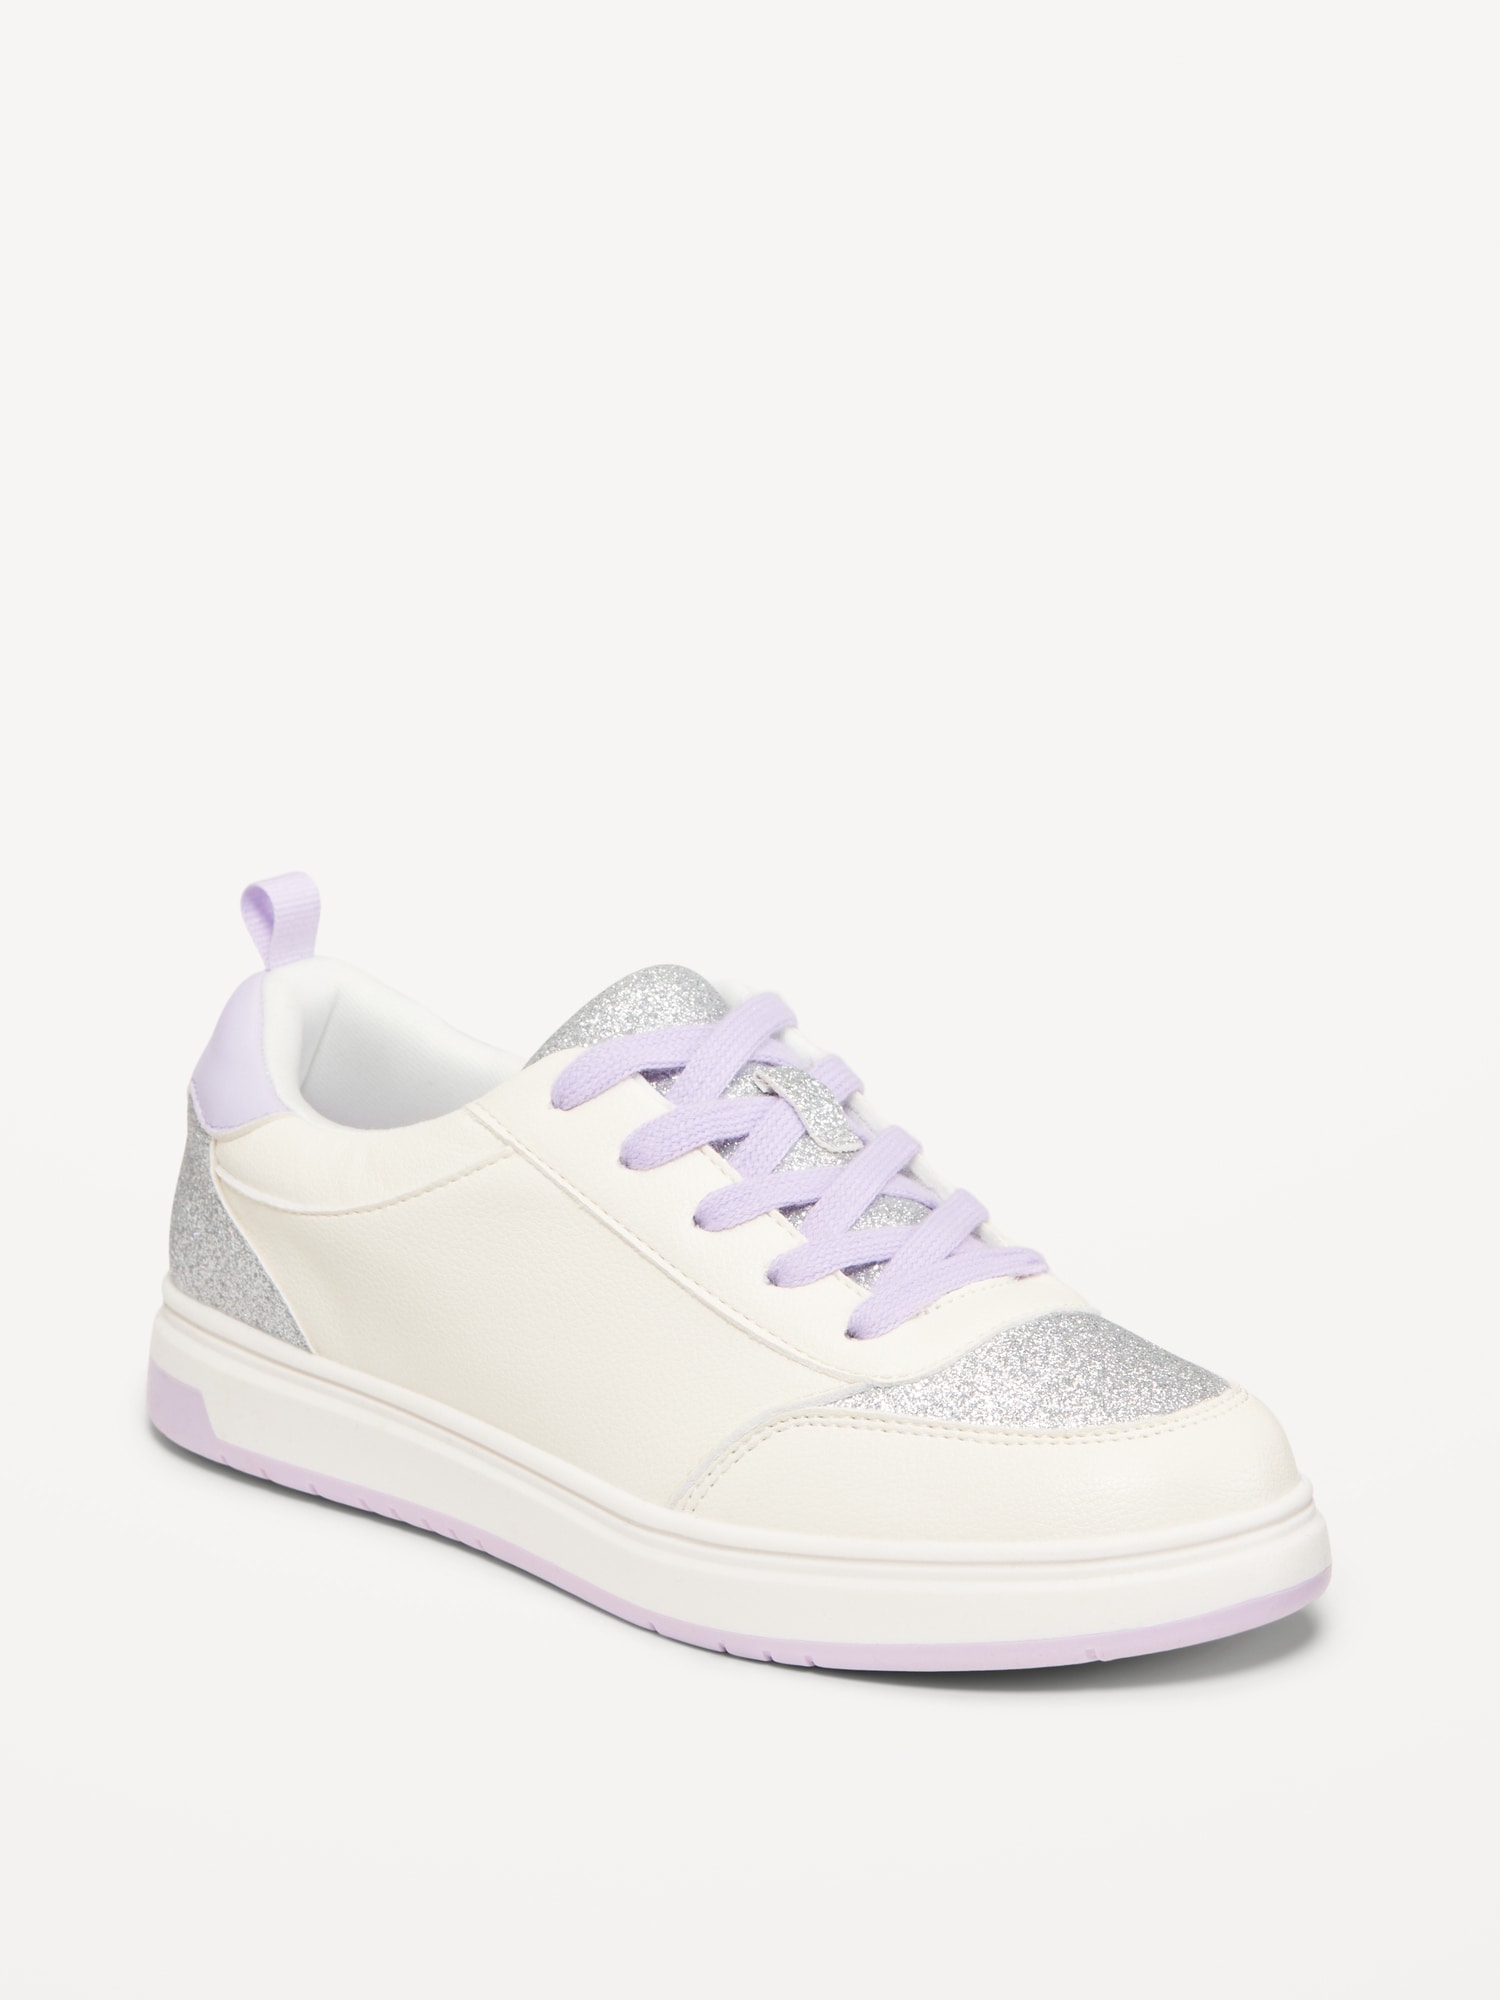 Shiny Low-Top Sneakers for Girls